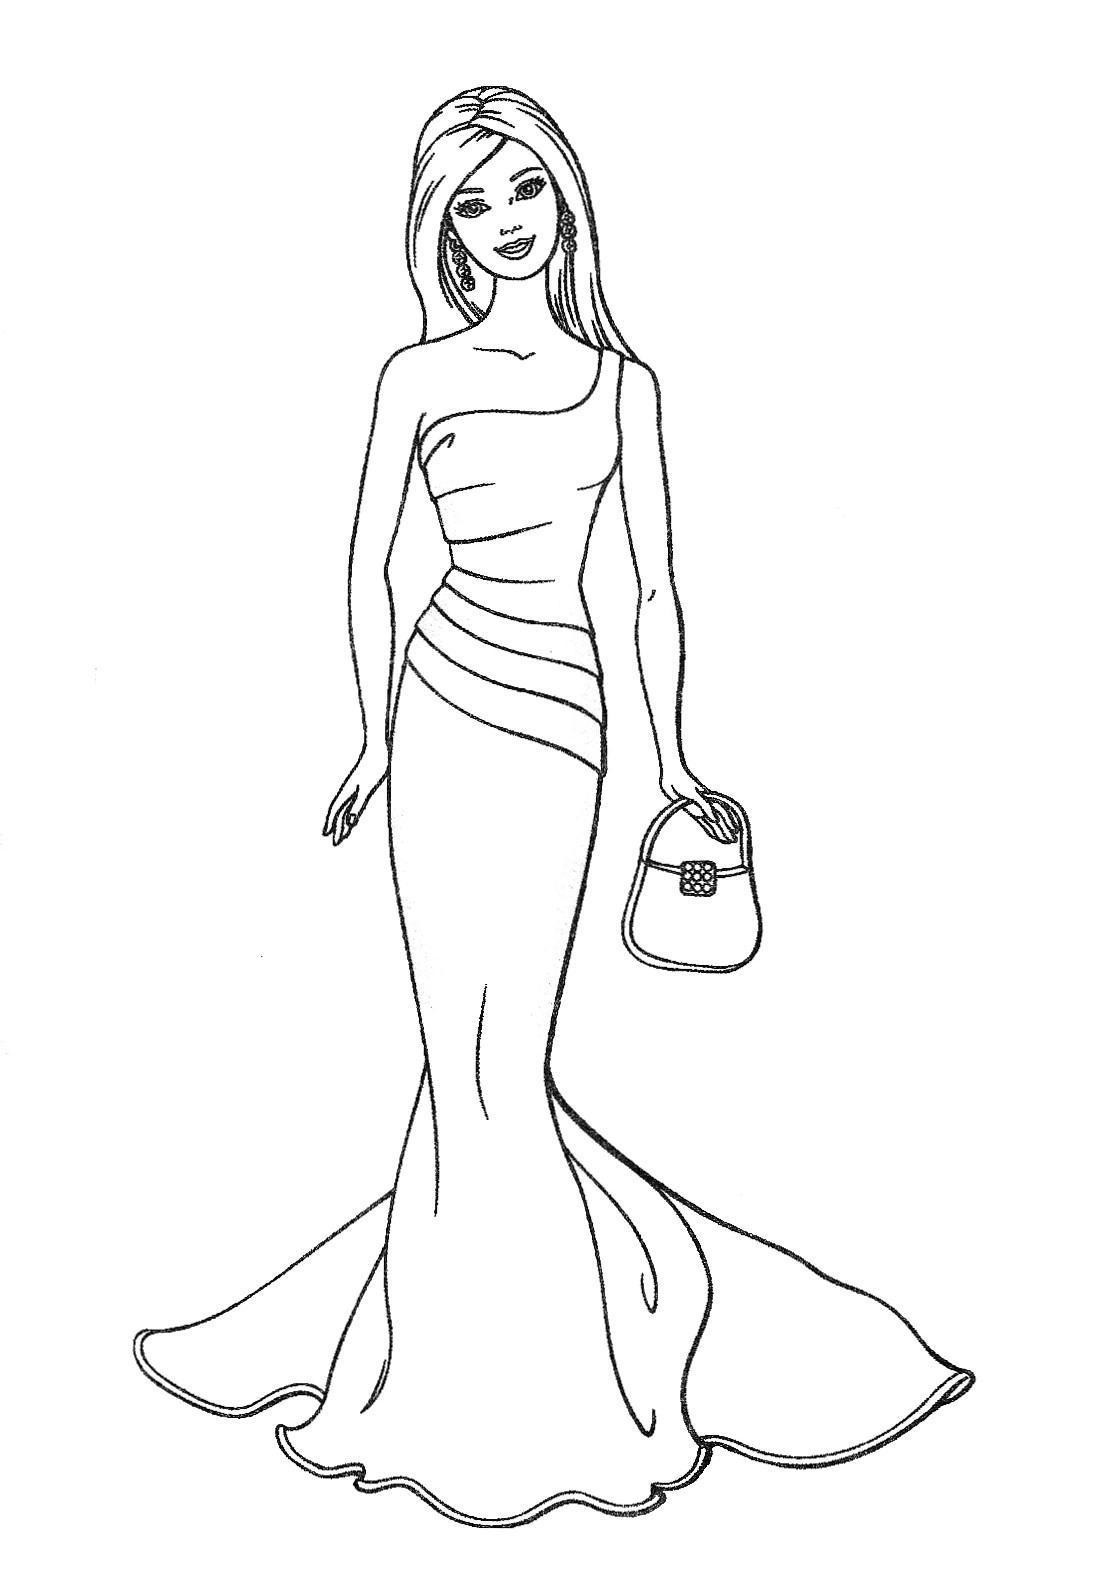 Barbie Coloring Pages Printable
 BARBIE COLORING PAGES